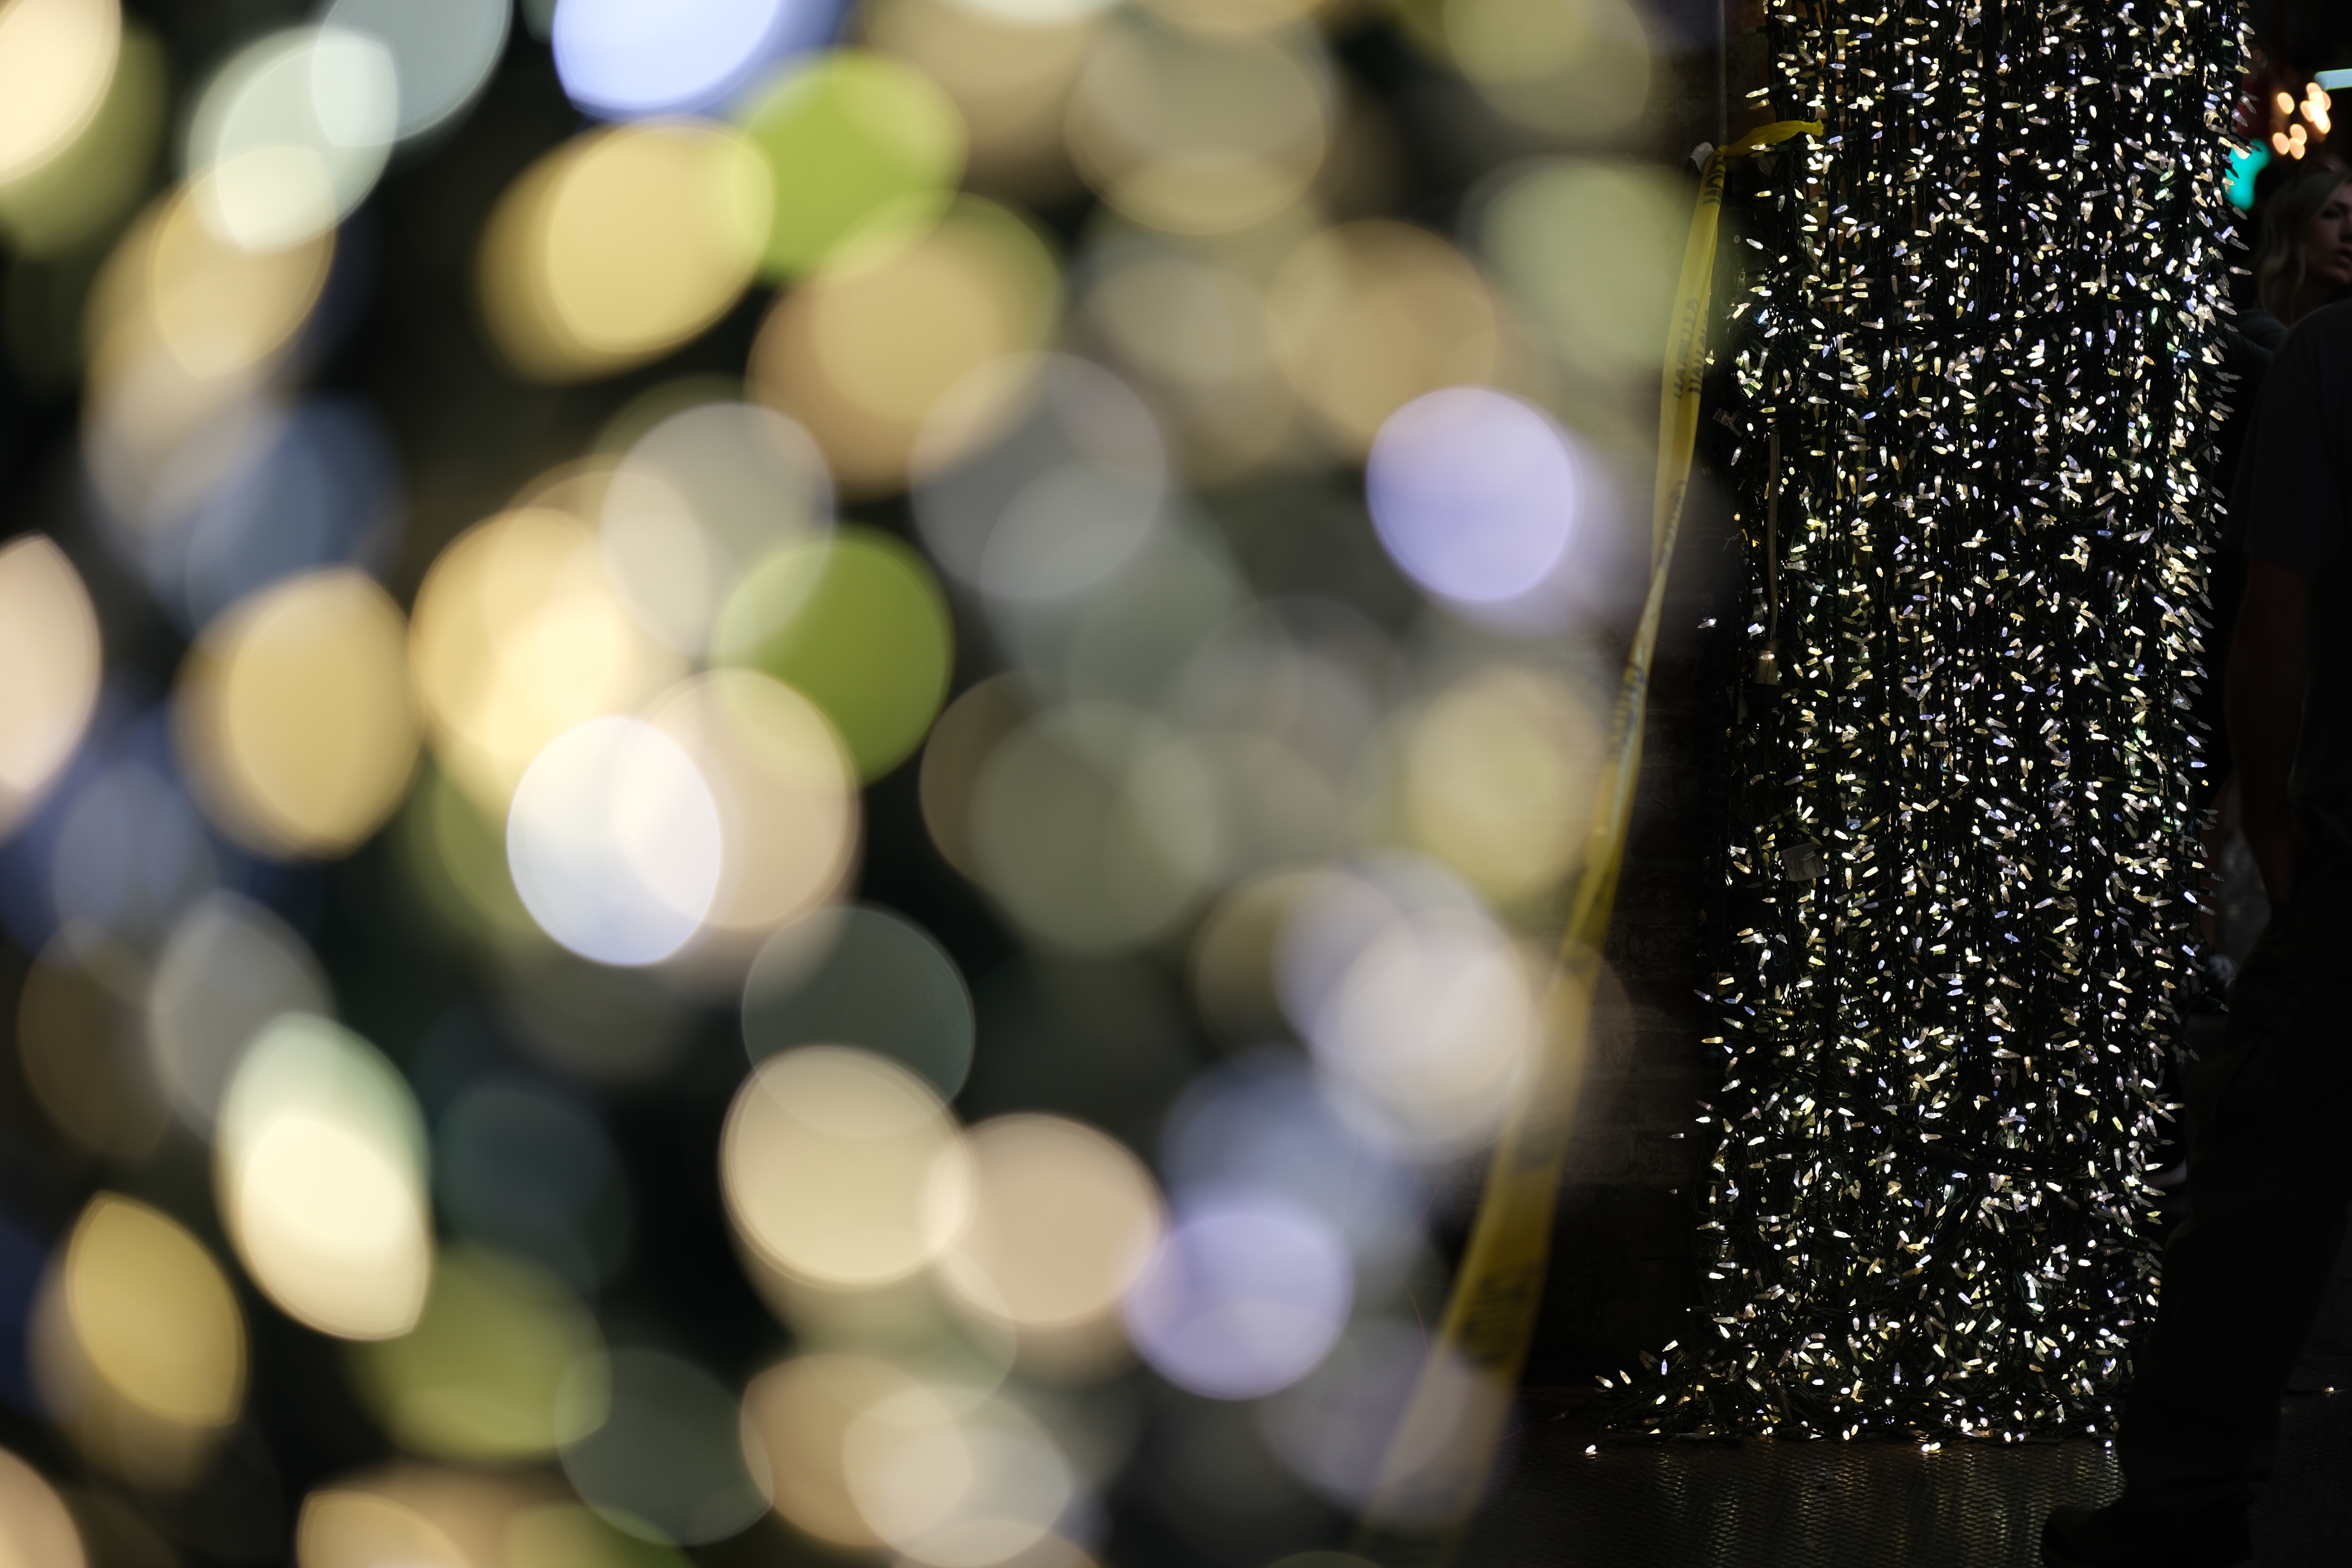 Front bokeh, taken with X-H2, 1/105s, f/1.2, ISO125, 56mm, Joshua Waller